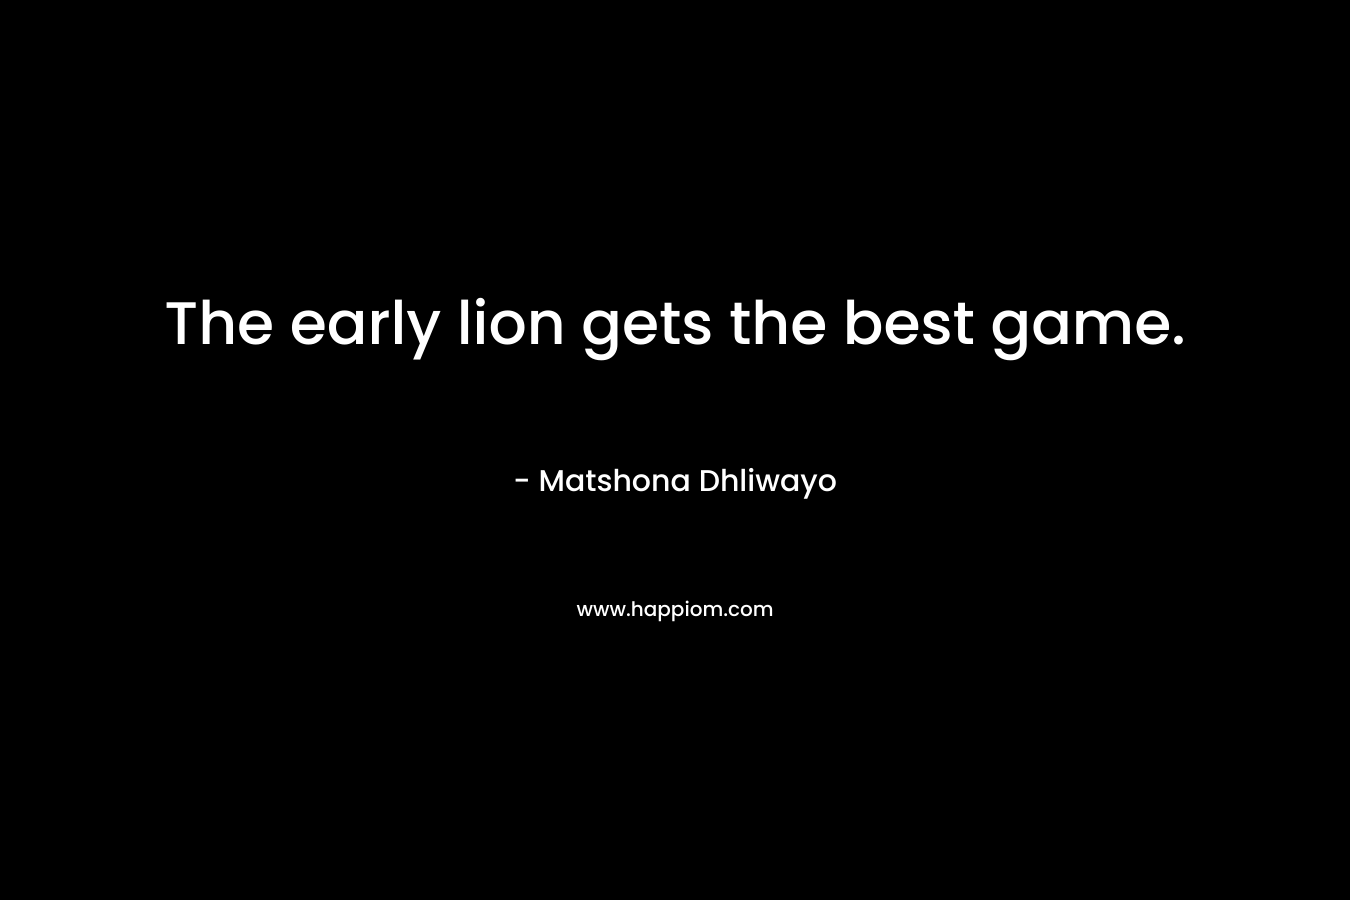 The early lion gets the best game. – Matshona Dhliwayo